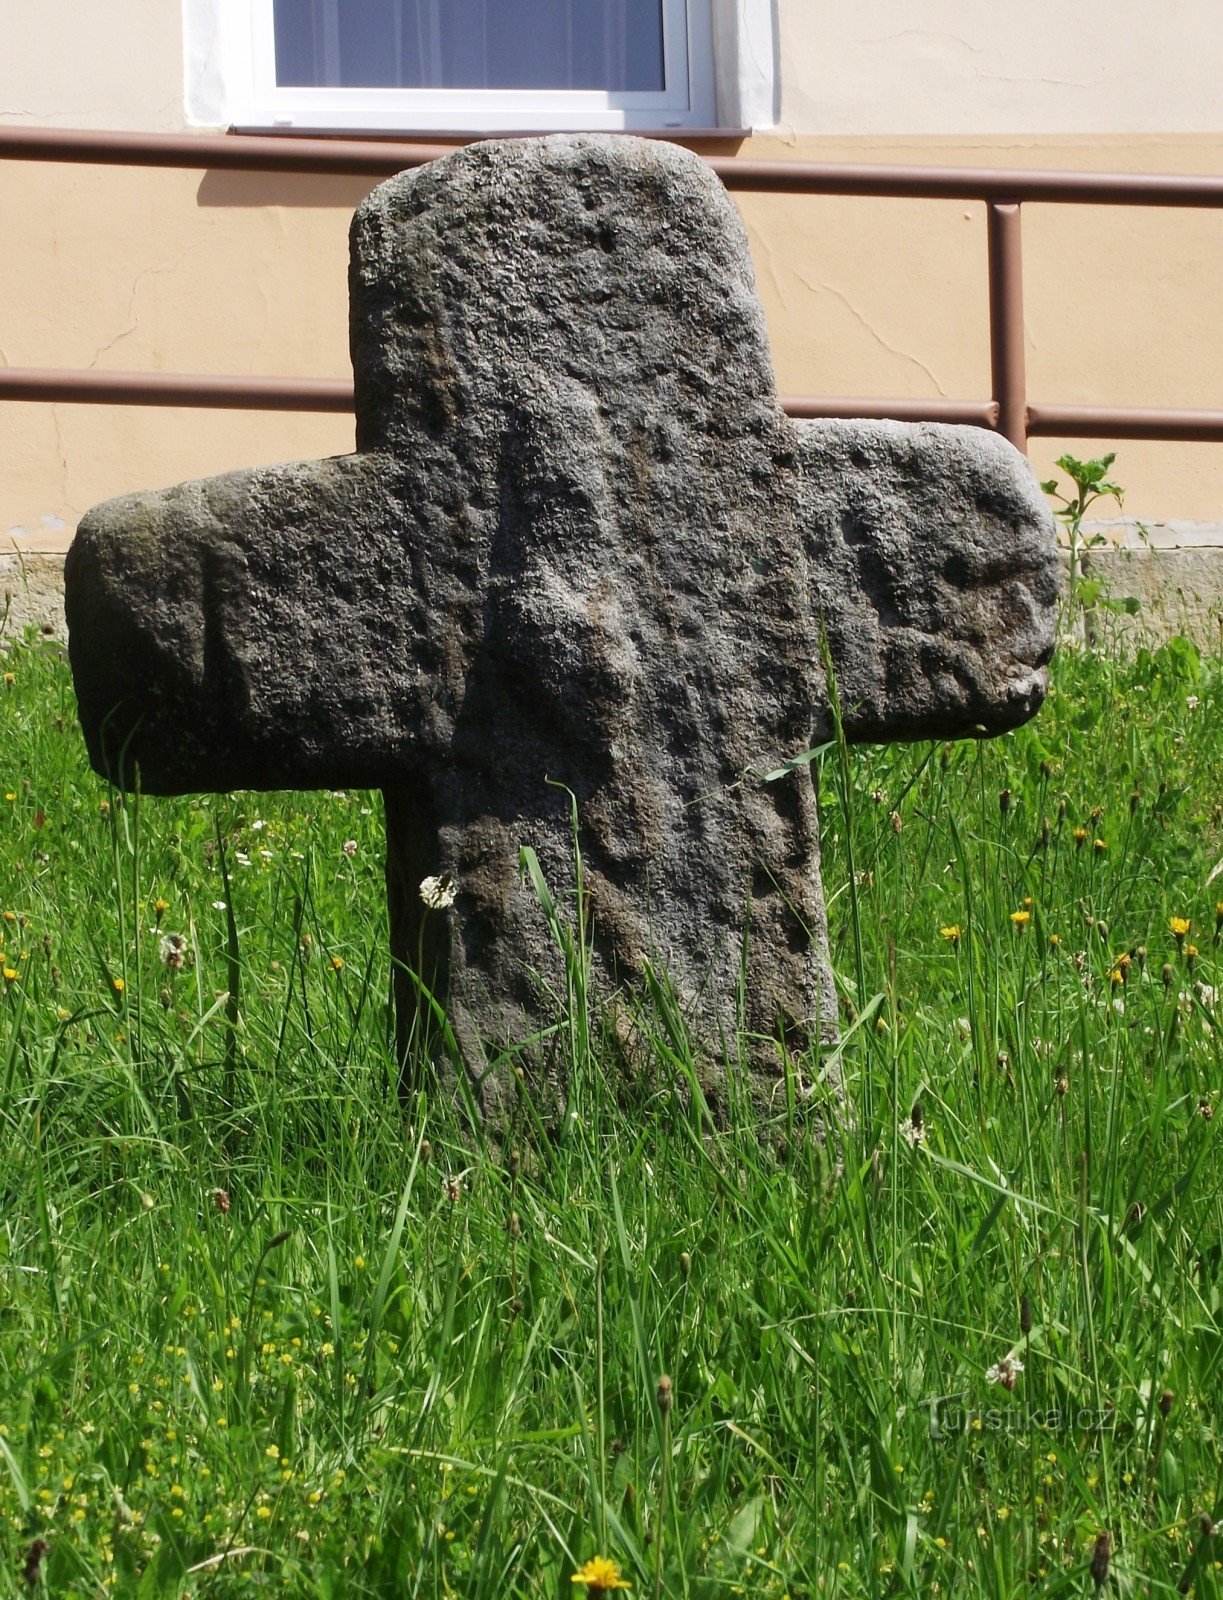 Verměřovice - the reconciliation cross or she killed him with a spindle